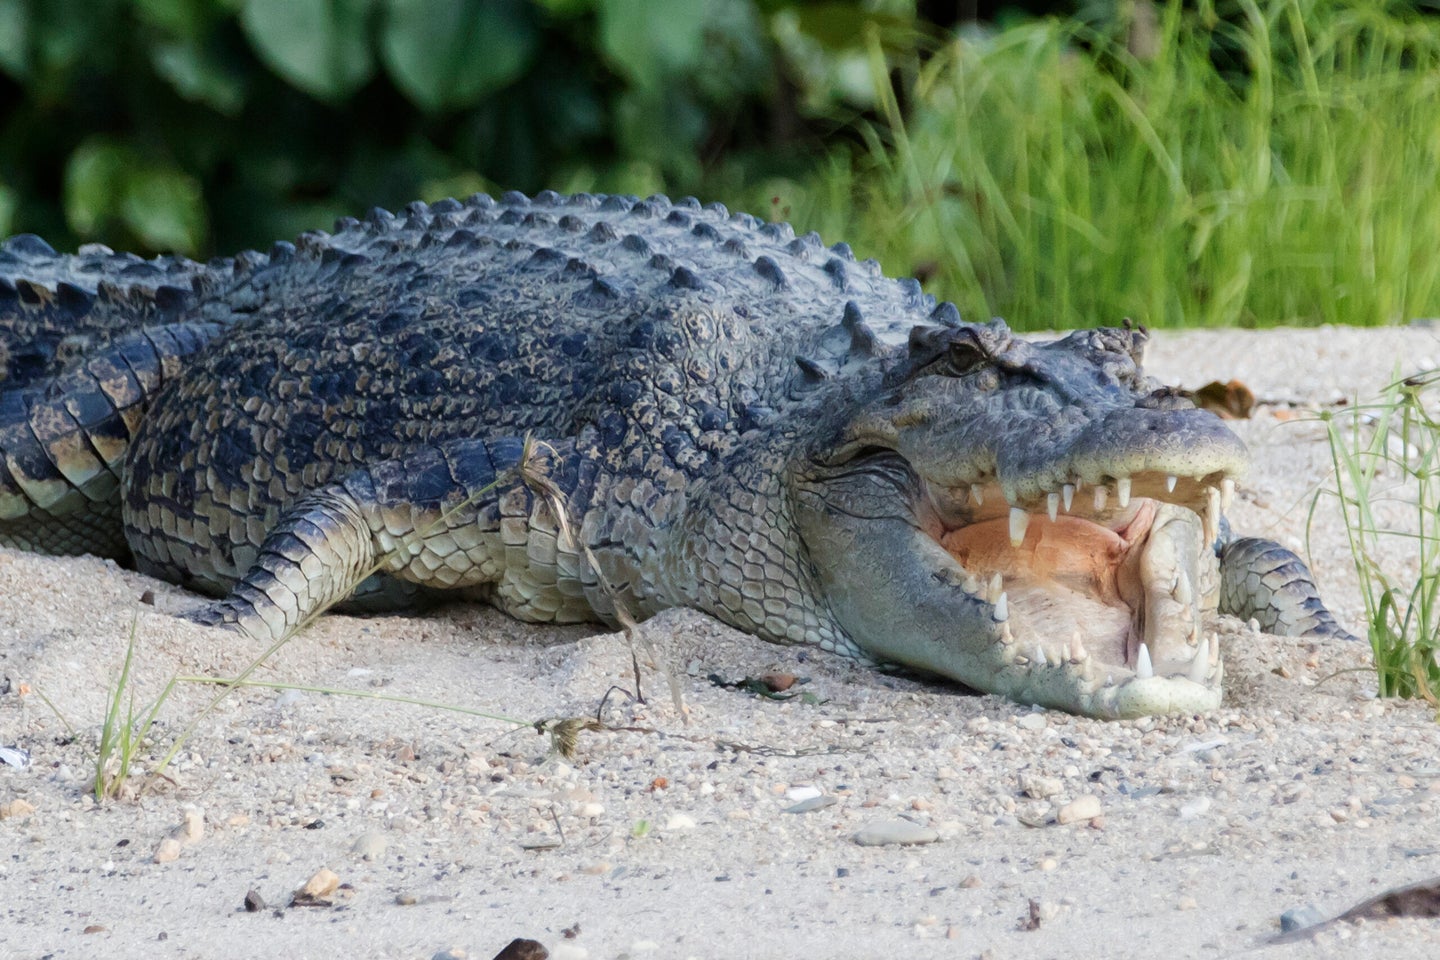 saltwater crocodile with mouth open